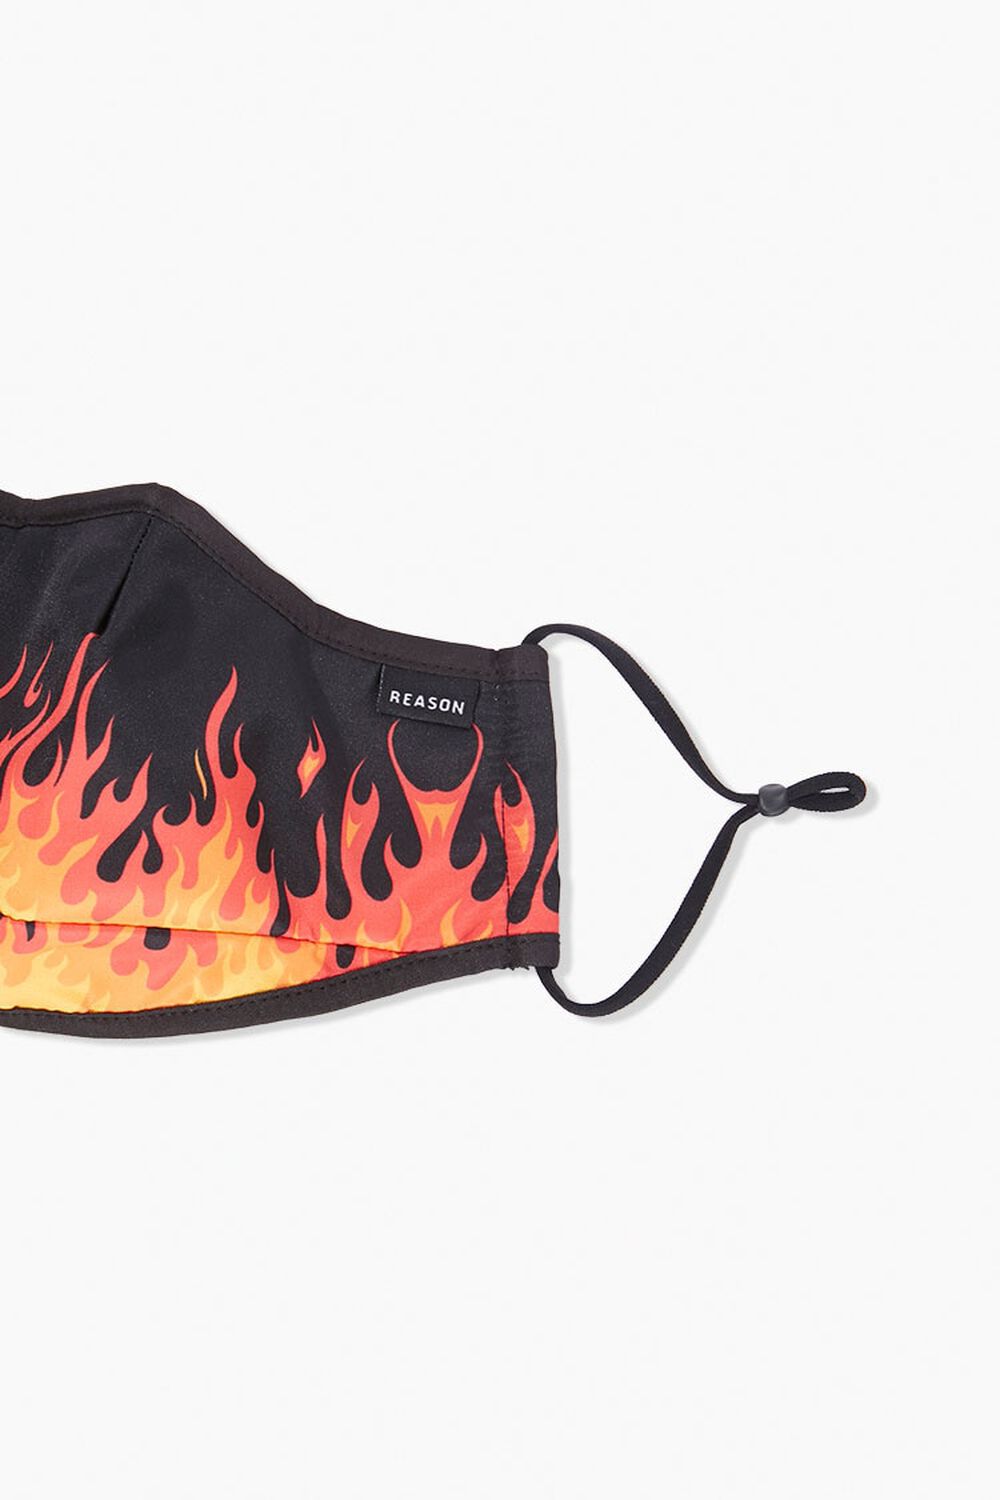 Reason Fire Graphic Face Mask, image 3